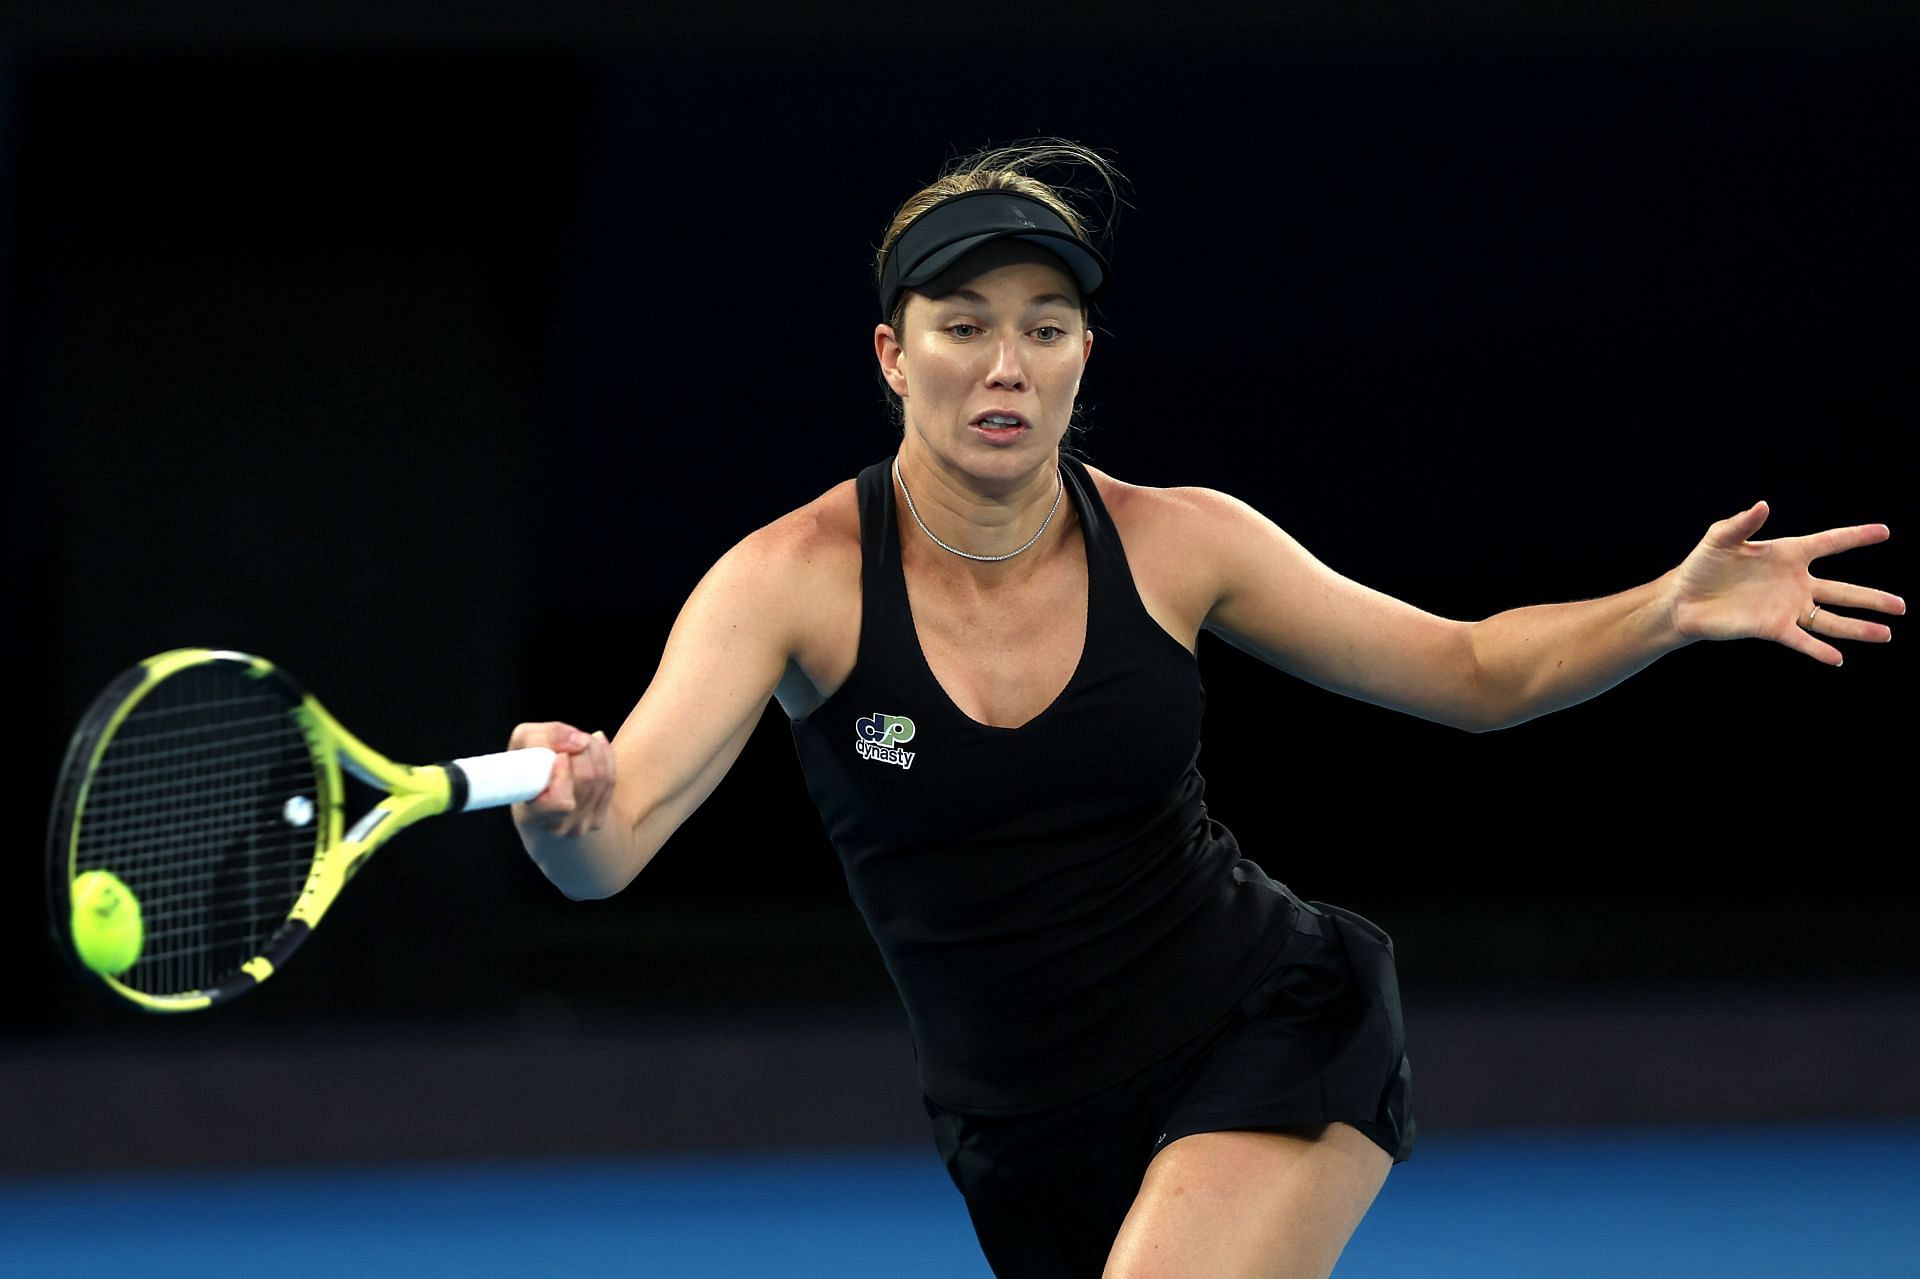 Danielle Collins will look to reach the third round of the Miami Open